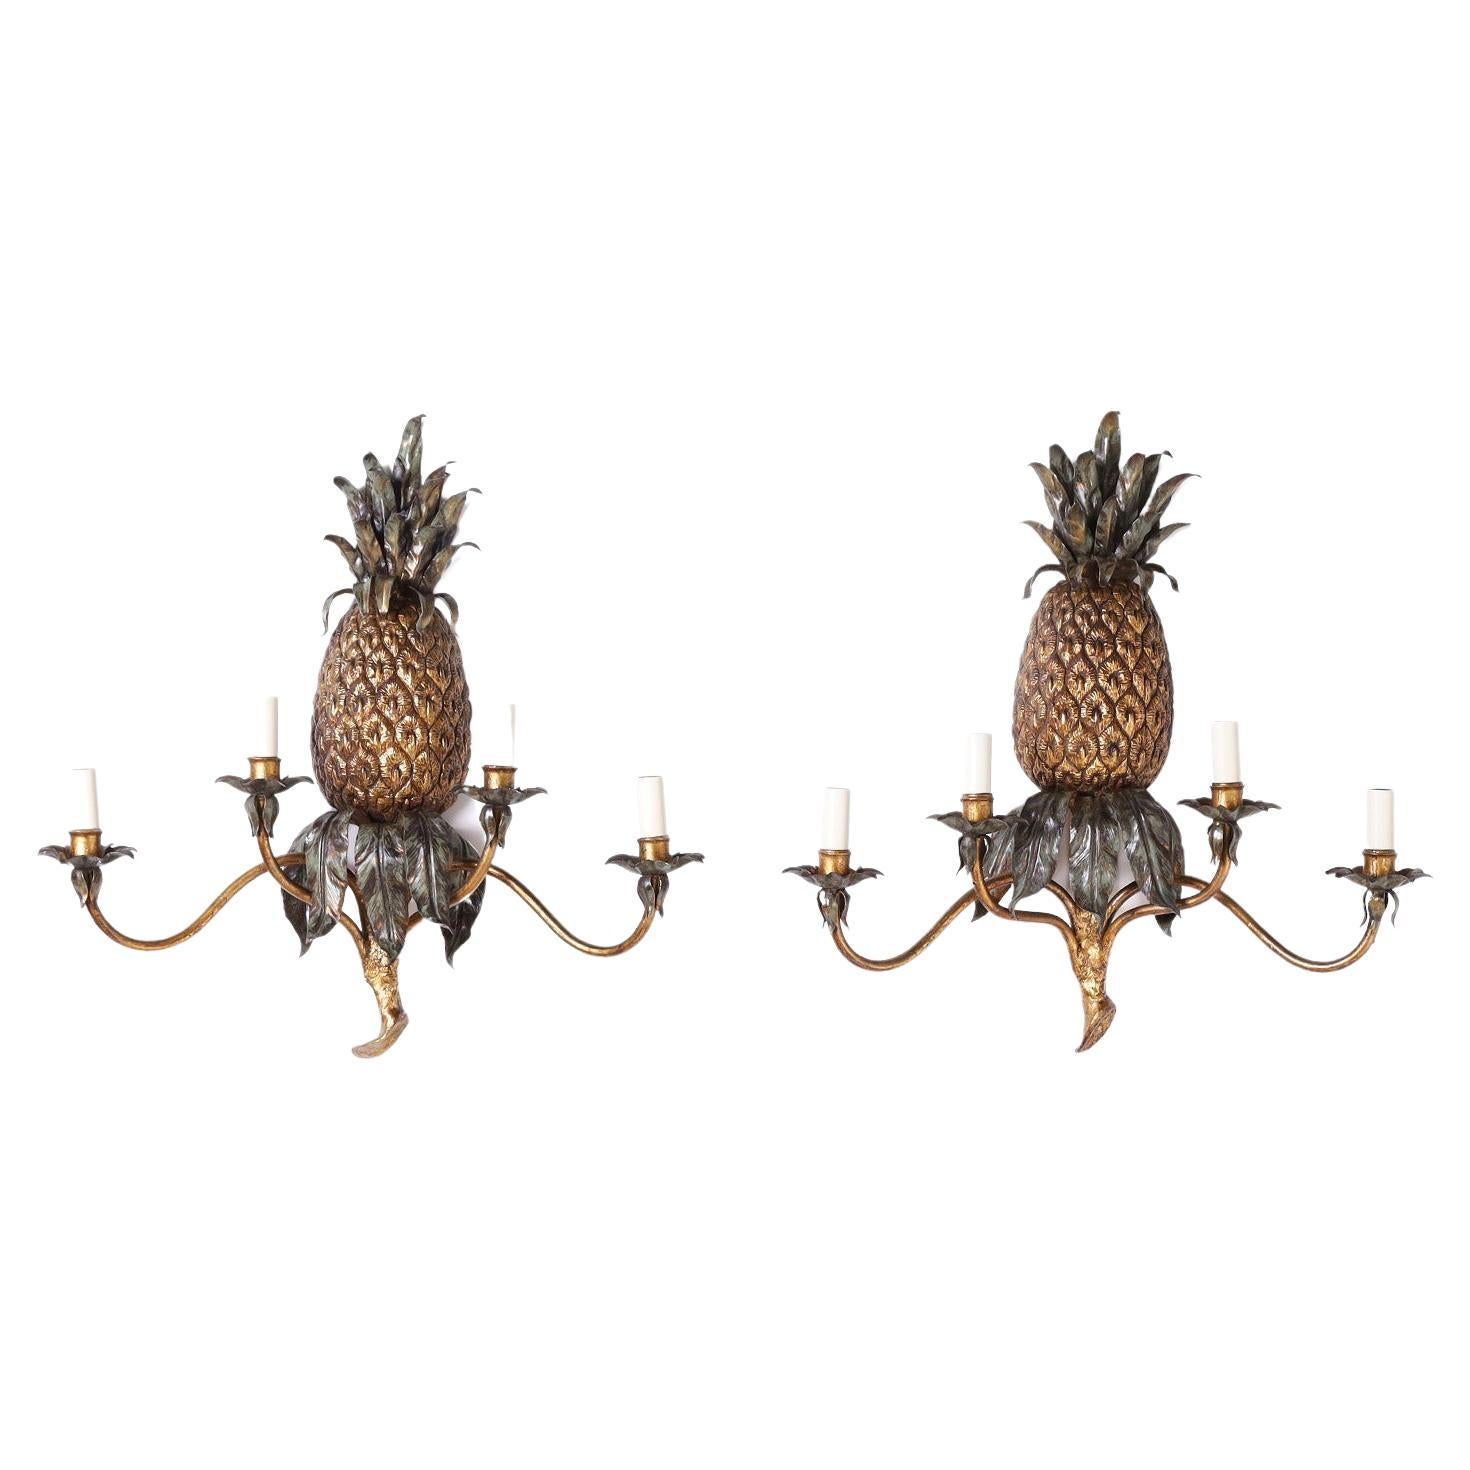 Pair of Italian Tole Pineapple Wall Sconces